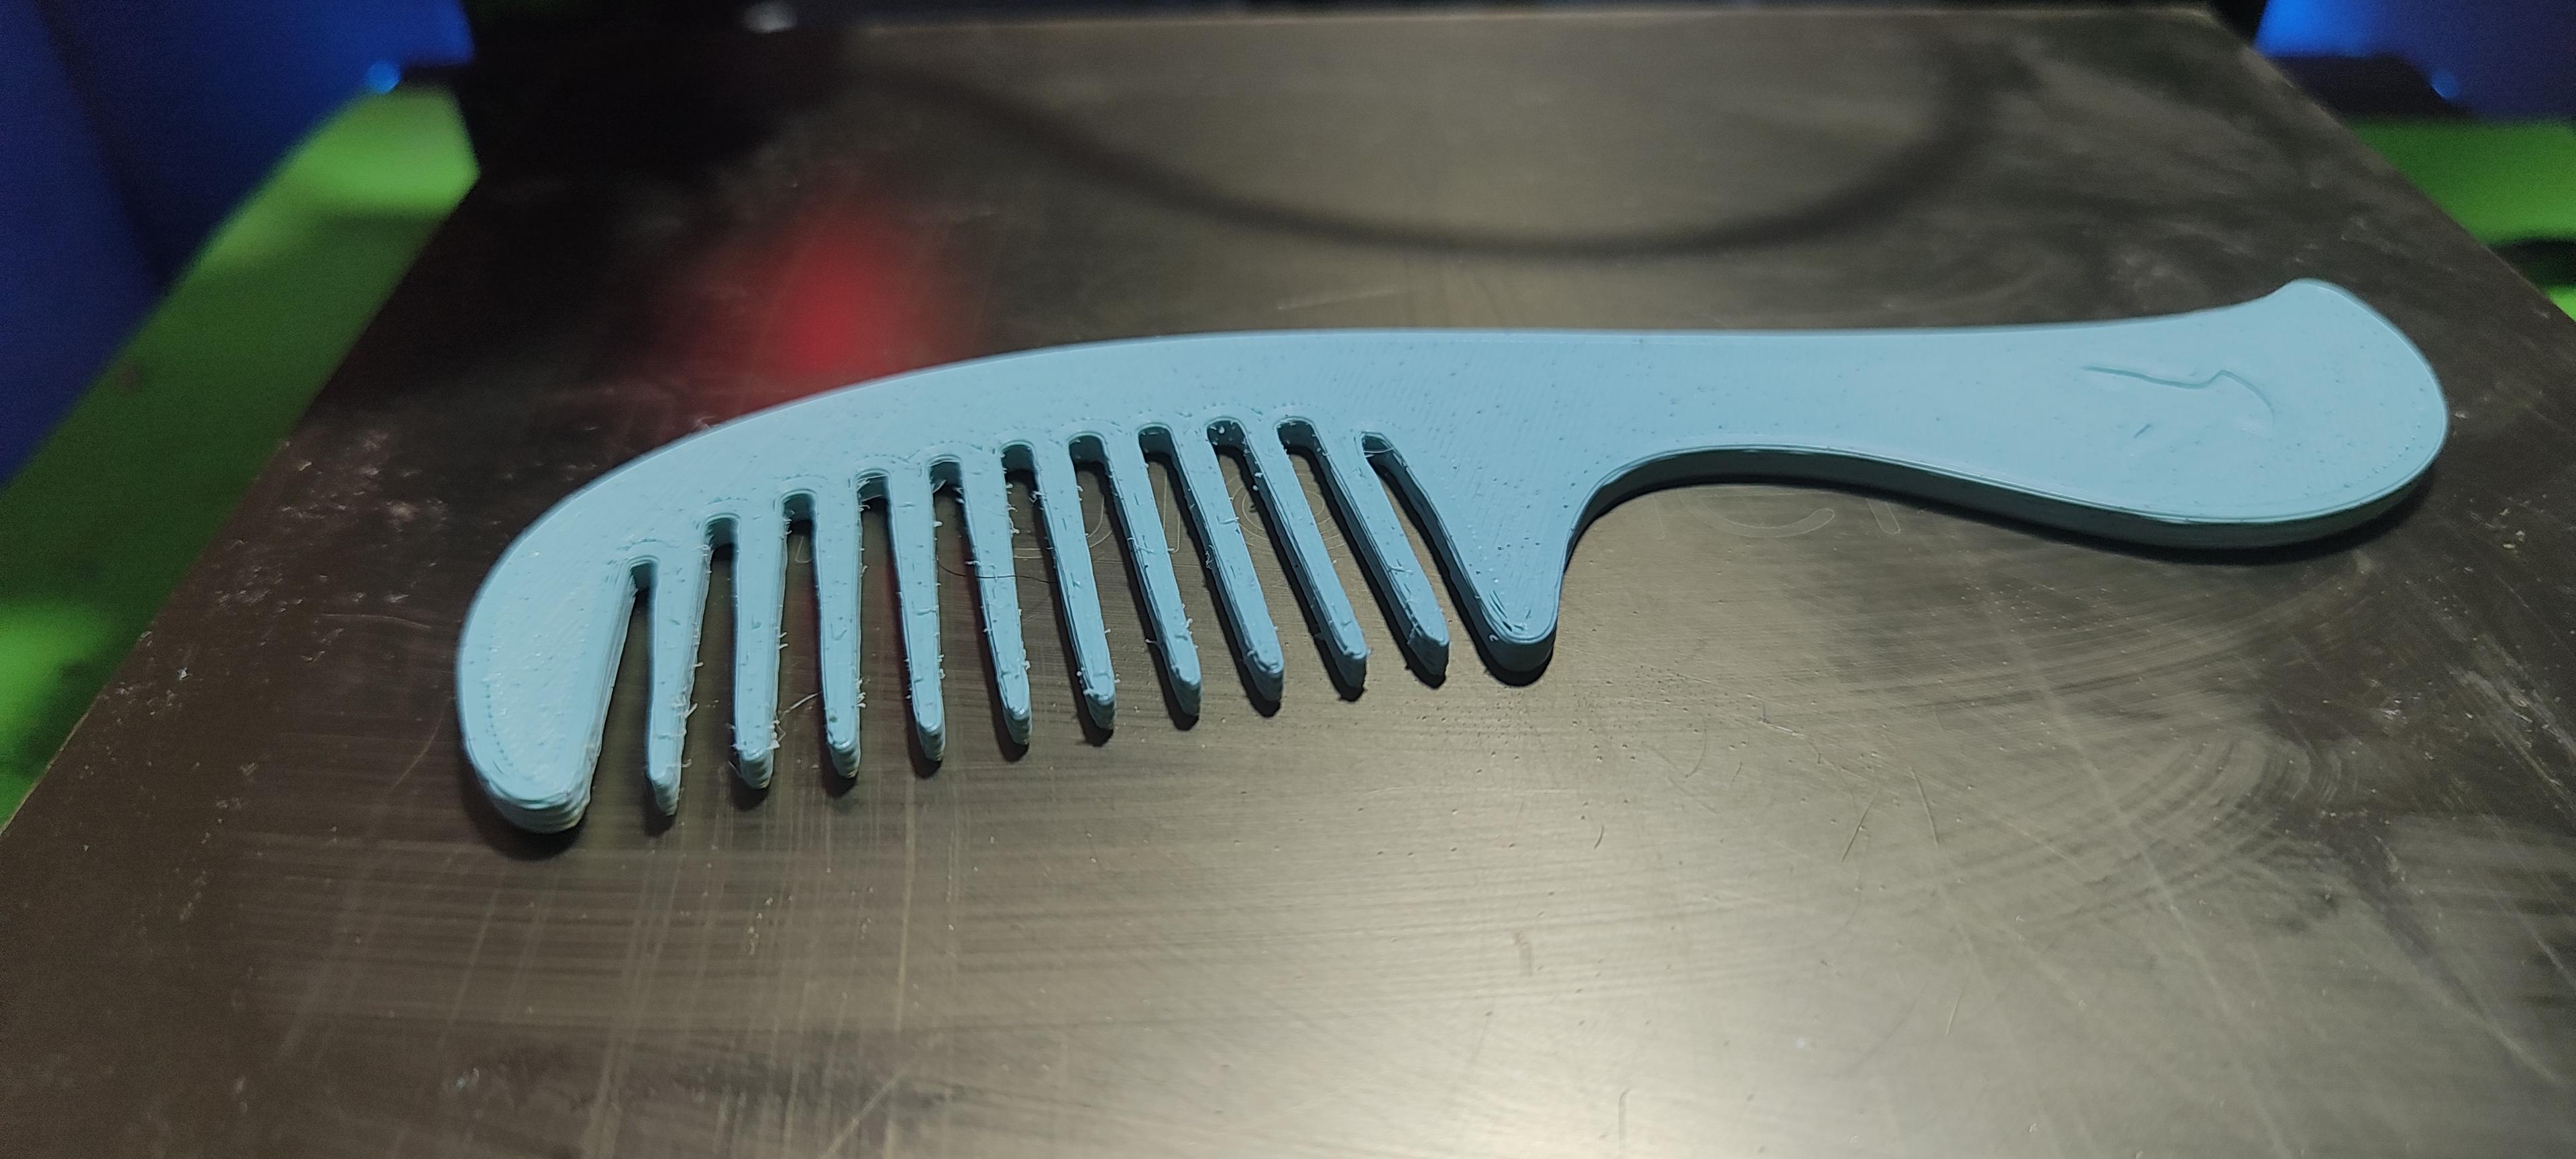 Hair Combs Set - Print with Artillery Genius 
Klipper 12 firmware
0.4 nozzle

Settings:
Slicer: OrcaSlicer 1.9
Material: Polymaker - Polyterra 
Bed: 65°
Perimeters: 4
Layer height: 0.28
Infill: 20%
Speed: Perimeters: 150 mm/s, External perimeters: 100 mm/s, Infill: 150 mm/s
Acceleration: Max 4500 mm/s2

Supports: None

Print time: 40m

Nice print.
 - 3d model